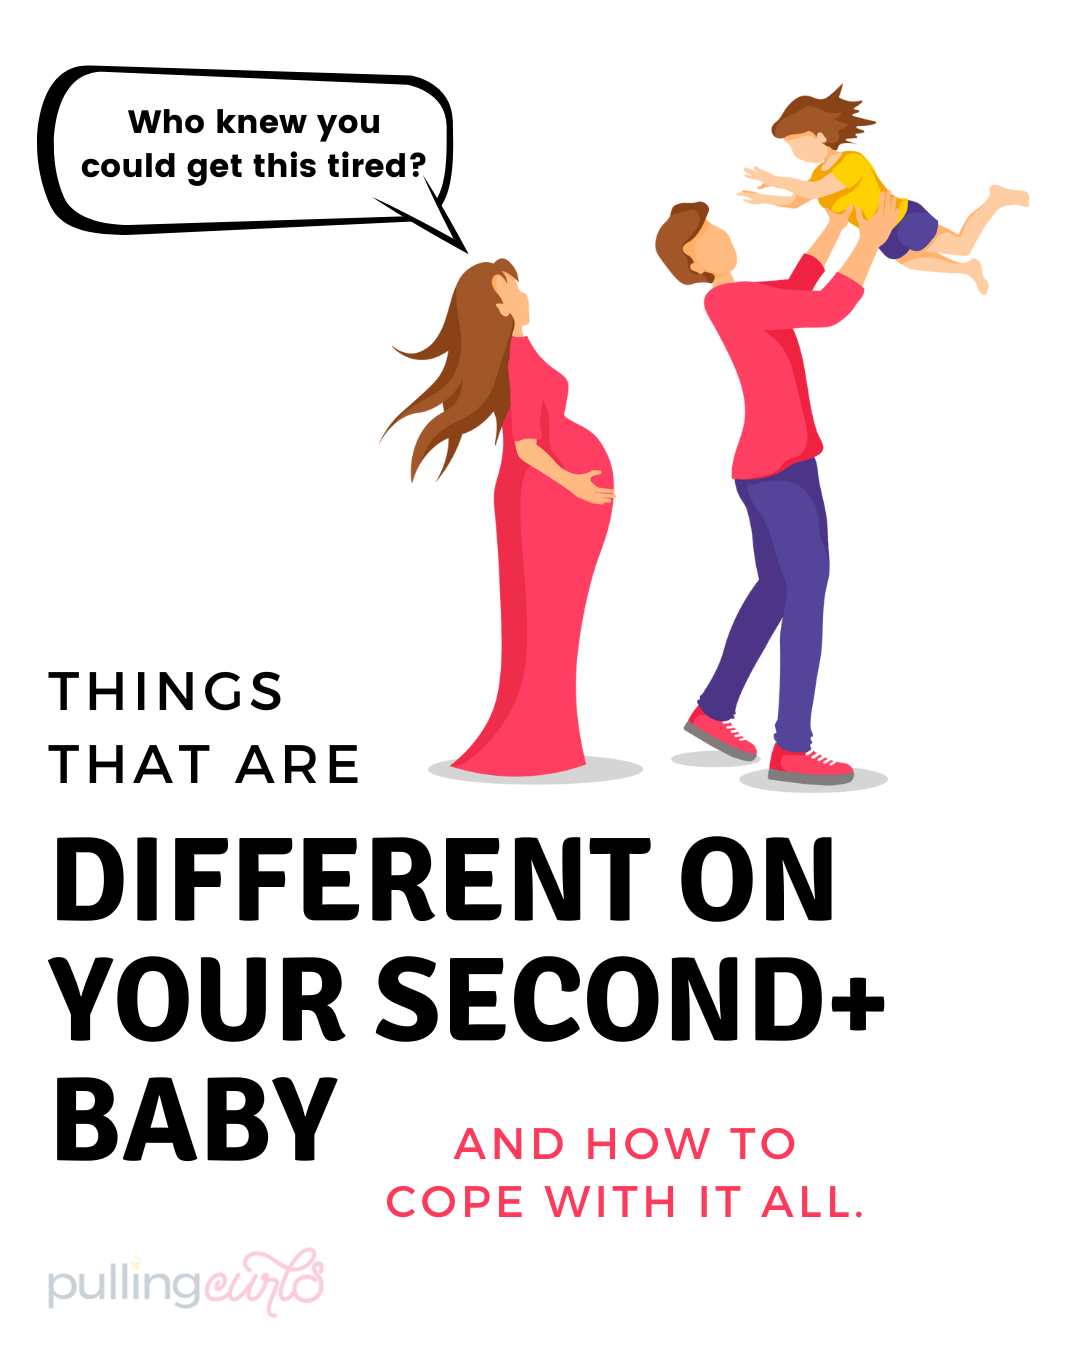 pregnant woman and family saying I didn't know I could get this tired // things that are different on your second+ baby and how to compe with it all. via @pullingcurls